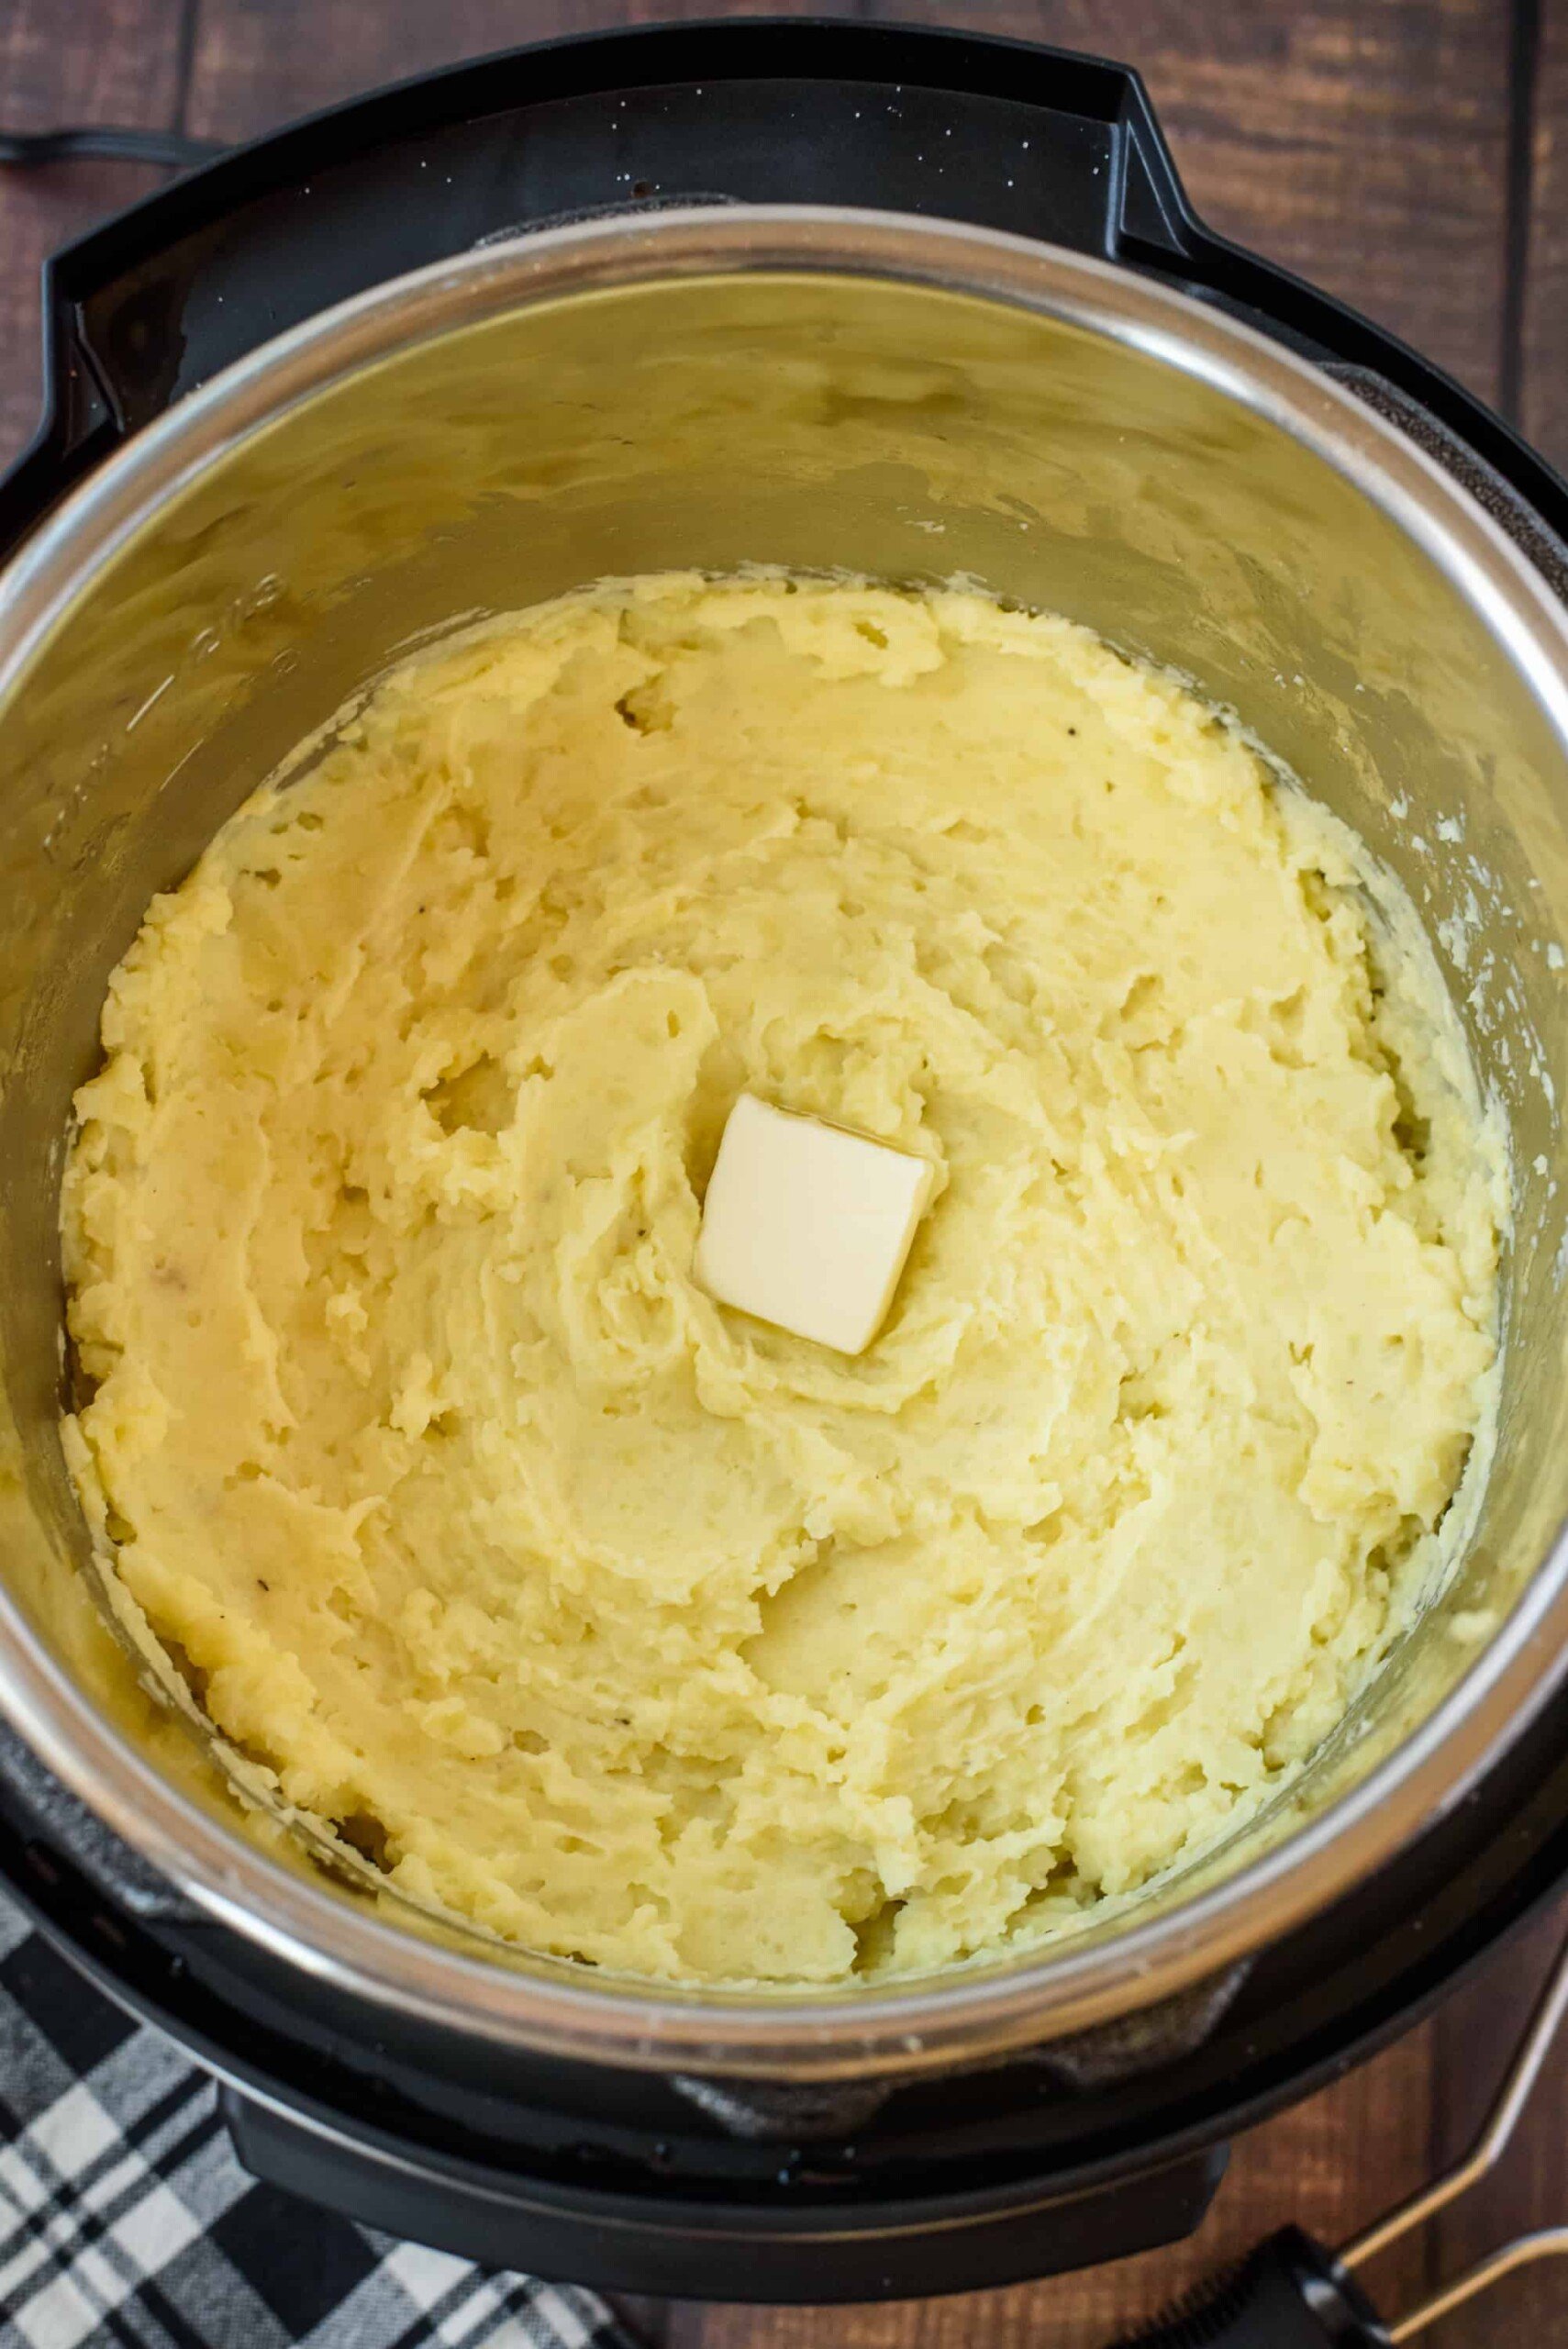 Mashed potatoes with a dollop of butter in the pressure cooker.